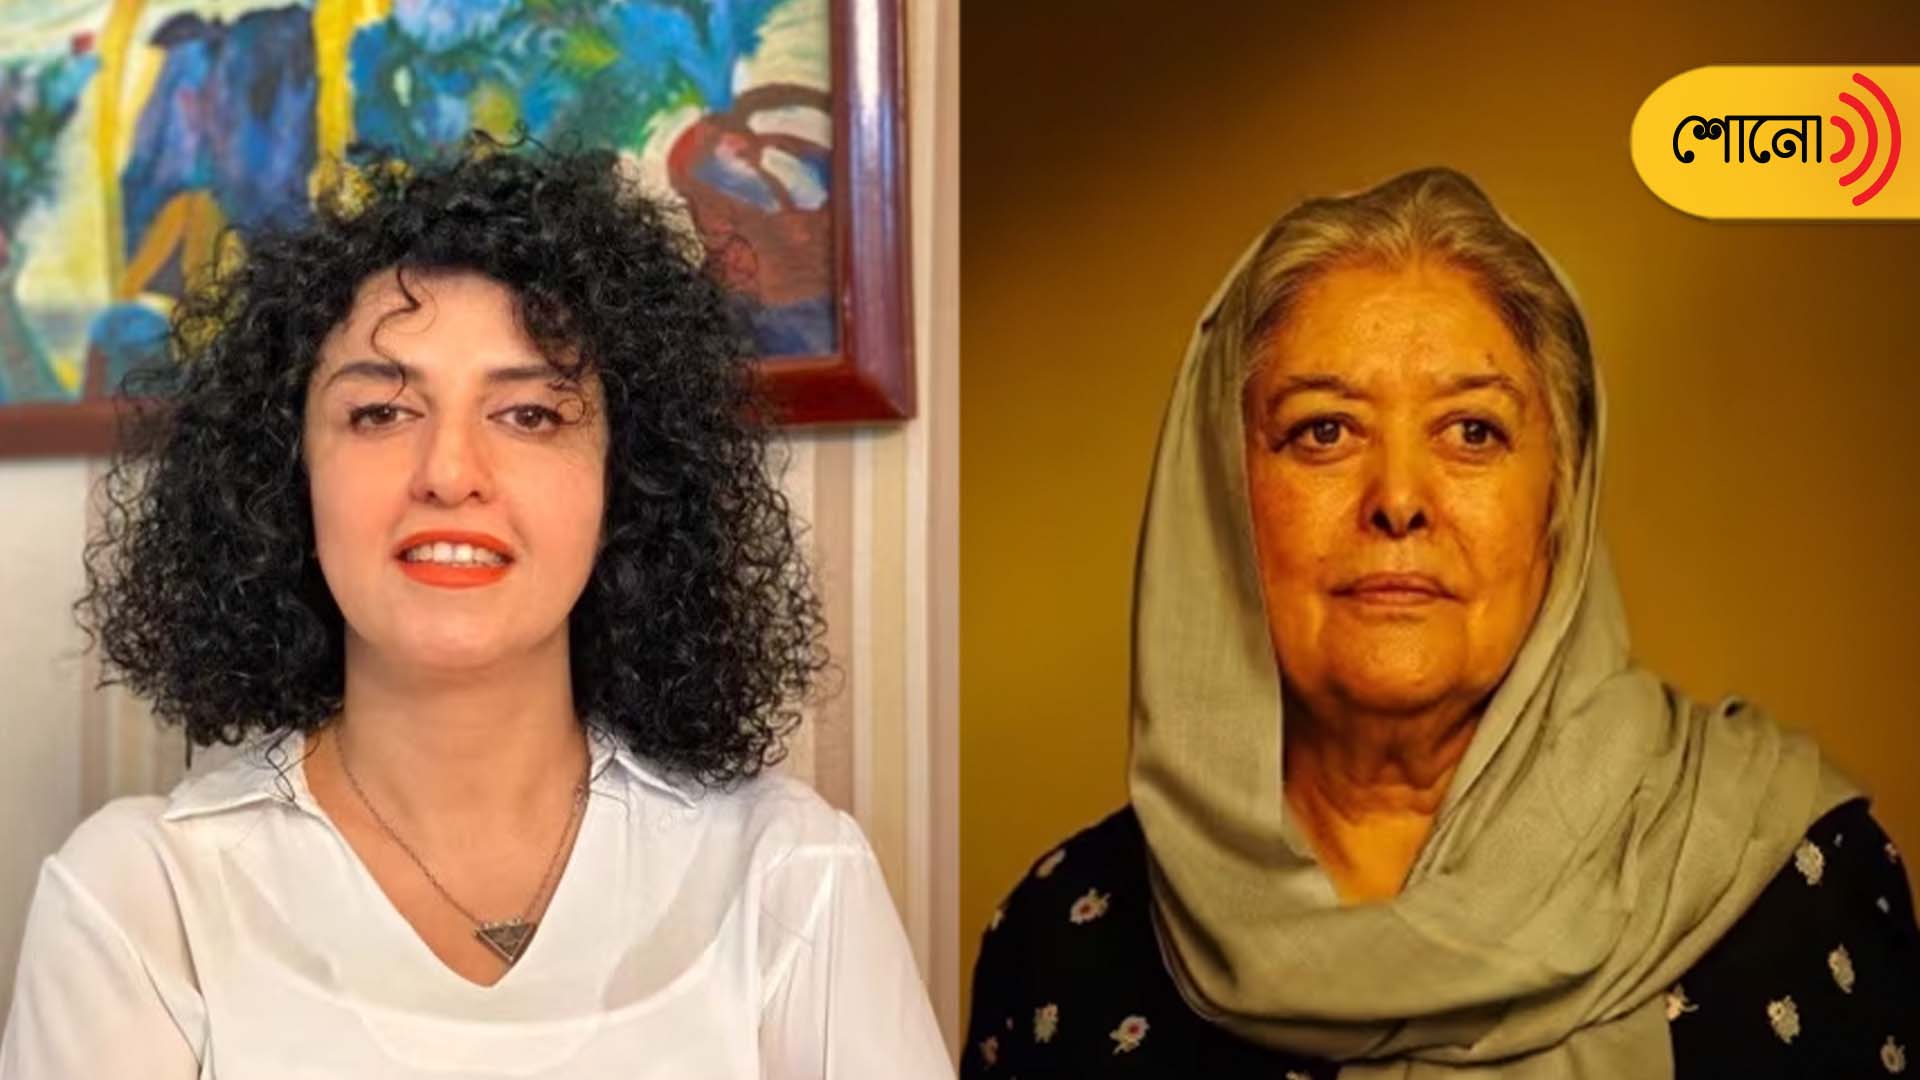 Nobel and Narges Mohammadi, Mahbouba Seraj and more women's rights activist